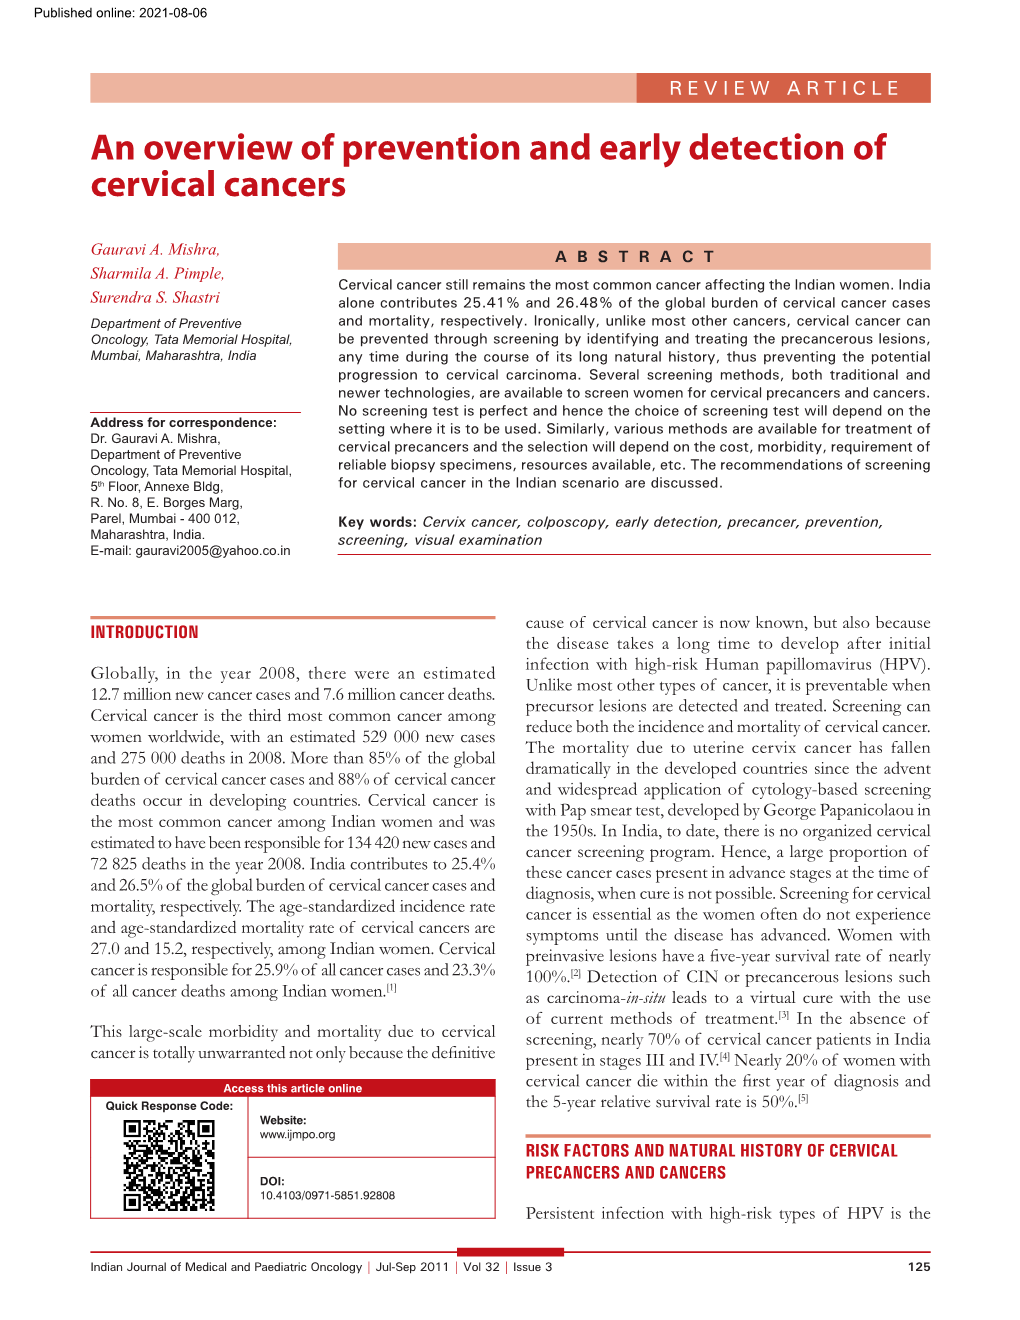 An Overview of Prevention and Early Detection of Cervical Cancers